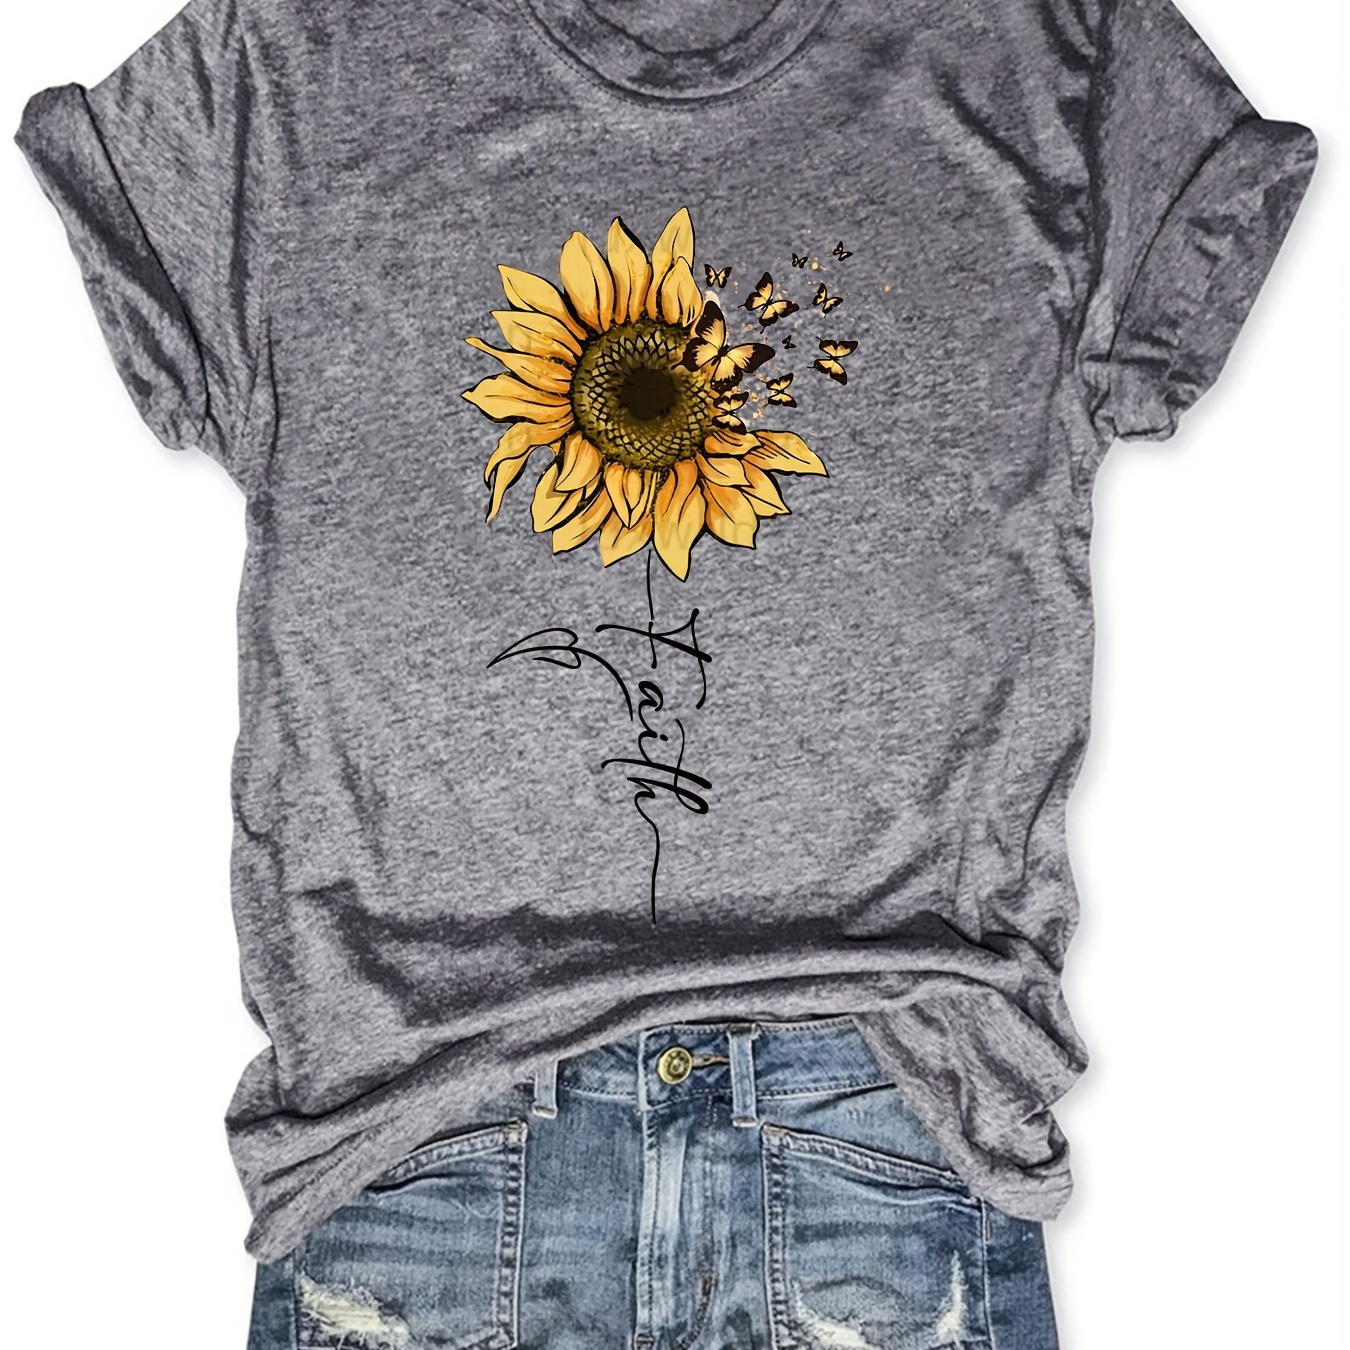 

Sunflower & Butterfly Print T-shirt, Casual Short Sleeve Top For Spring & Summer, Women's Clothing